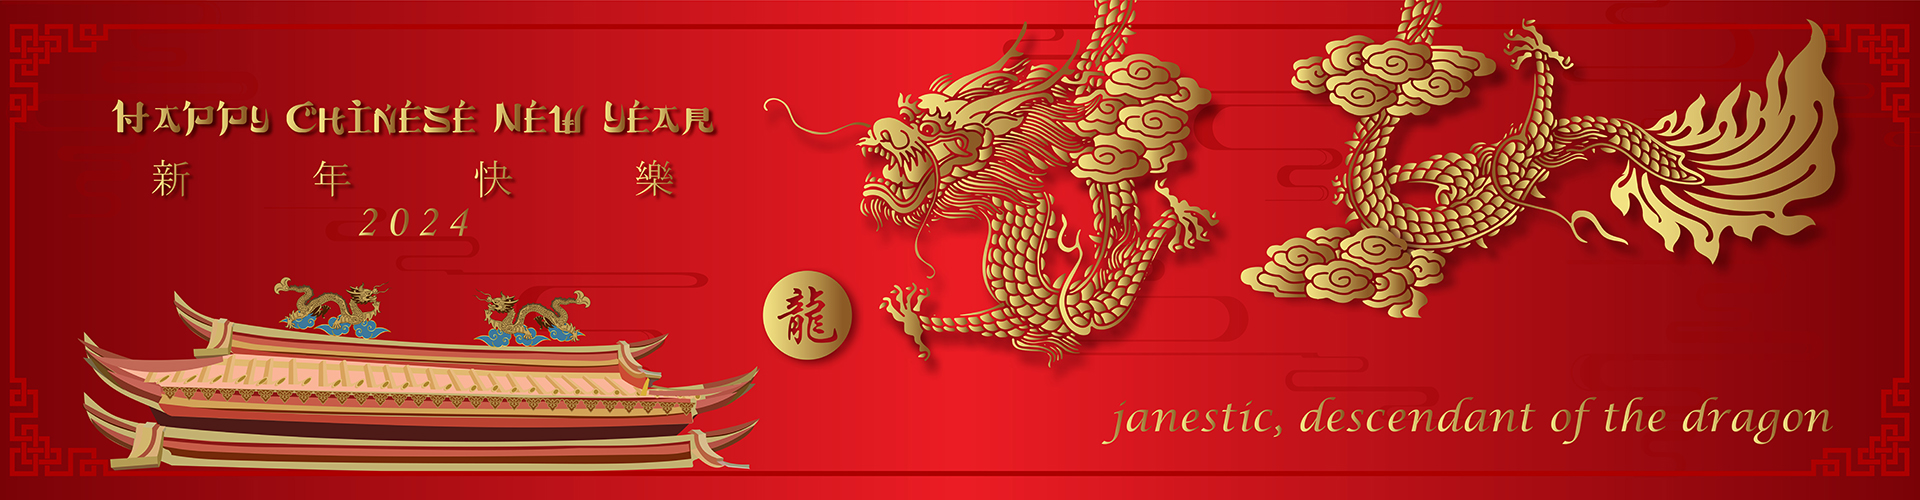 chinese new year of dragon